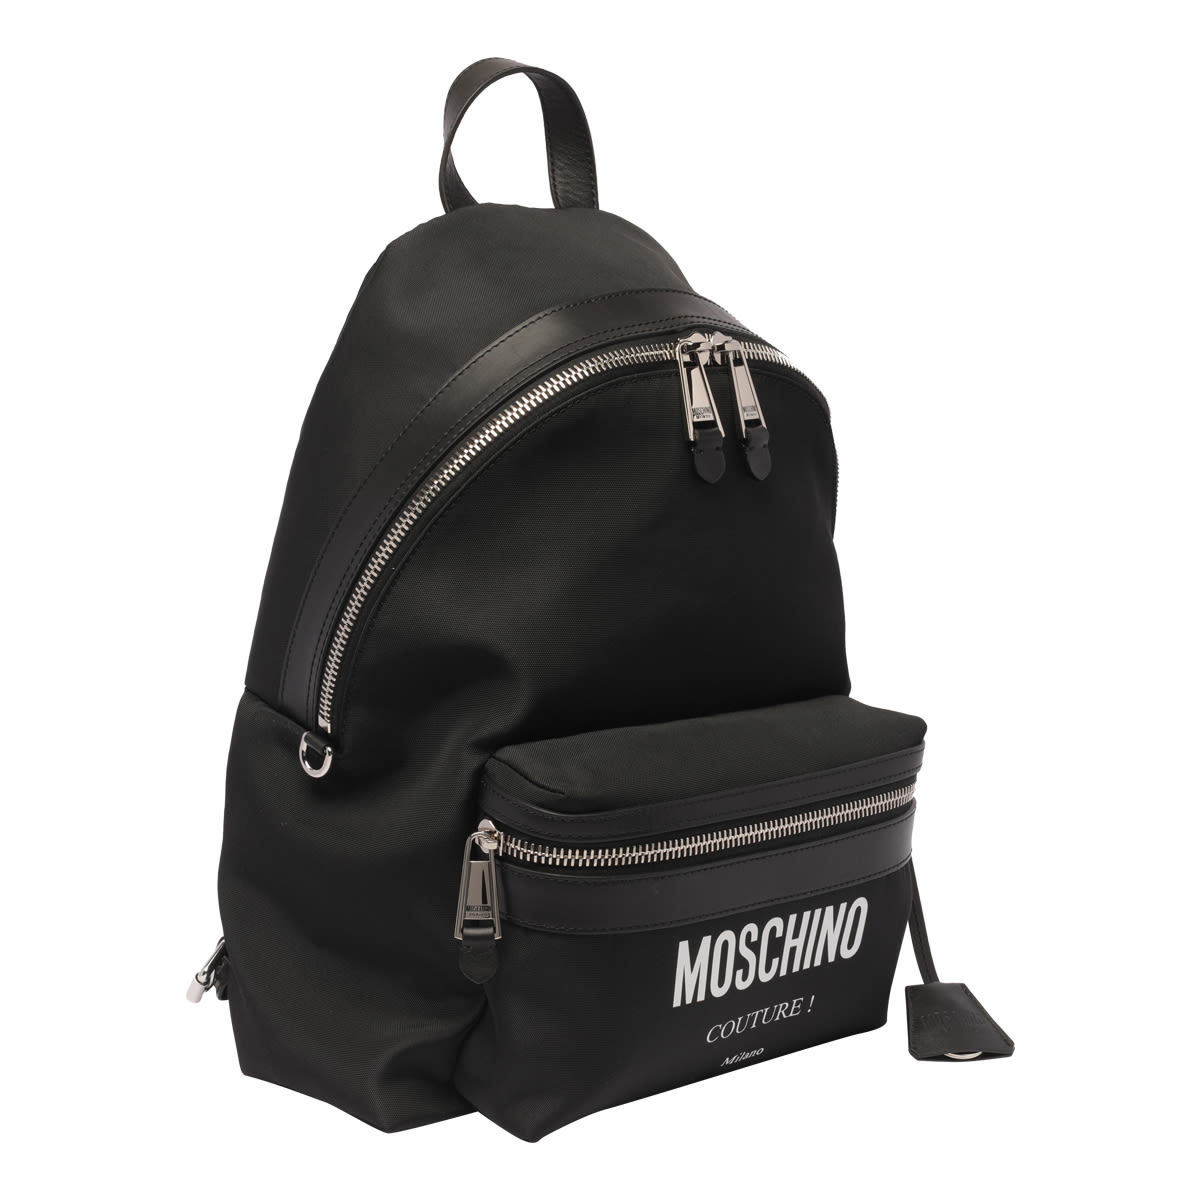 Shop Moschino Couture Backpack In Black